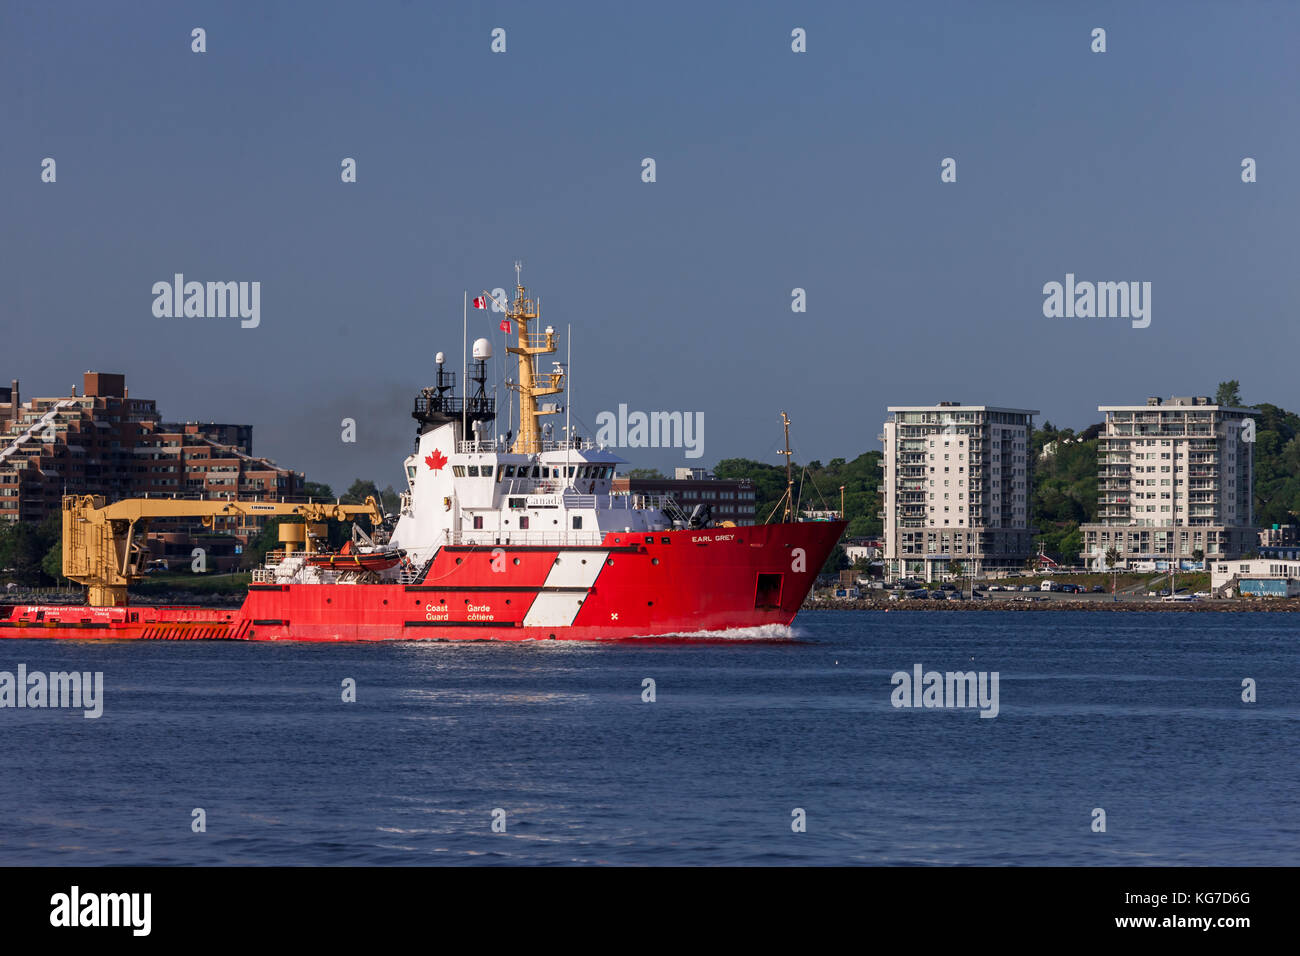 Halifax, Canada - August 29, 2017: The Canadian Coast Guard light icebreaker Earl Grey was commissioned in 1986 and is based in Charlottetown, PEI. Stock Photo